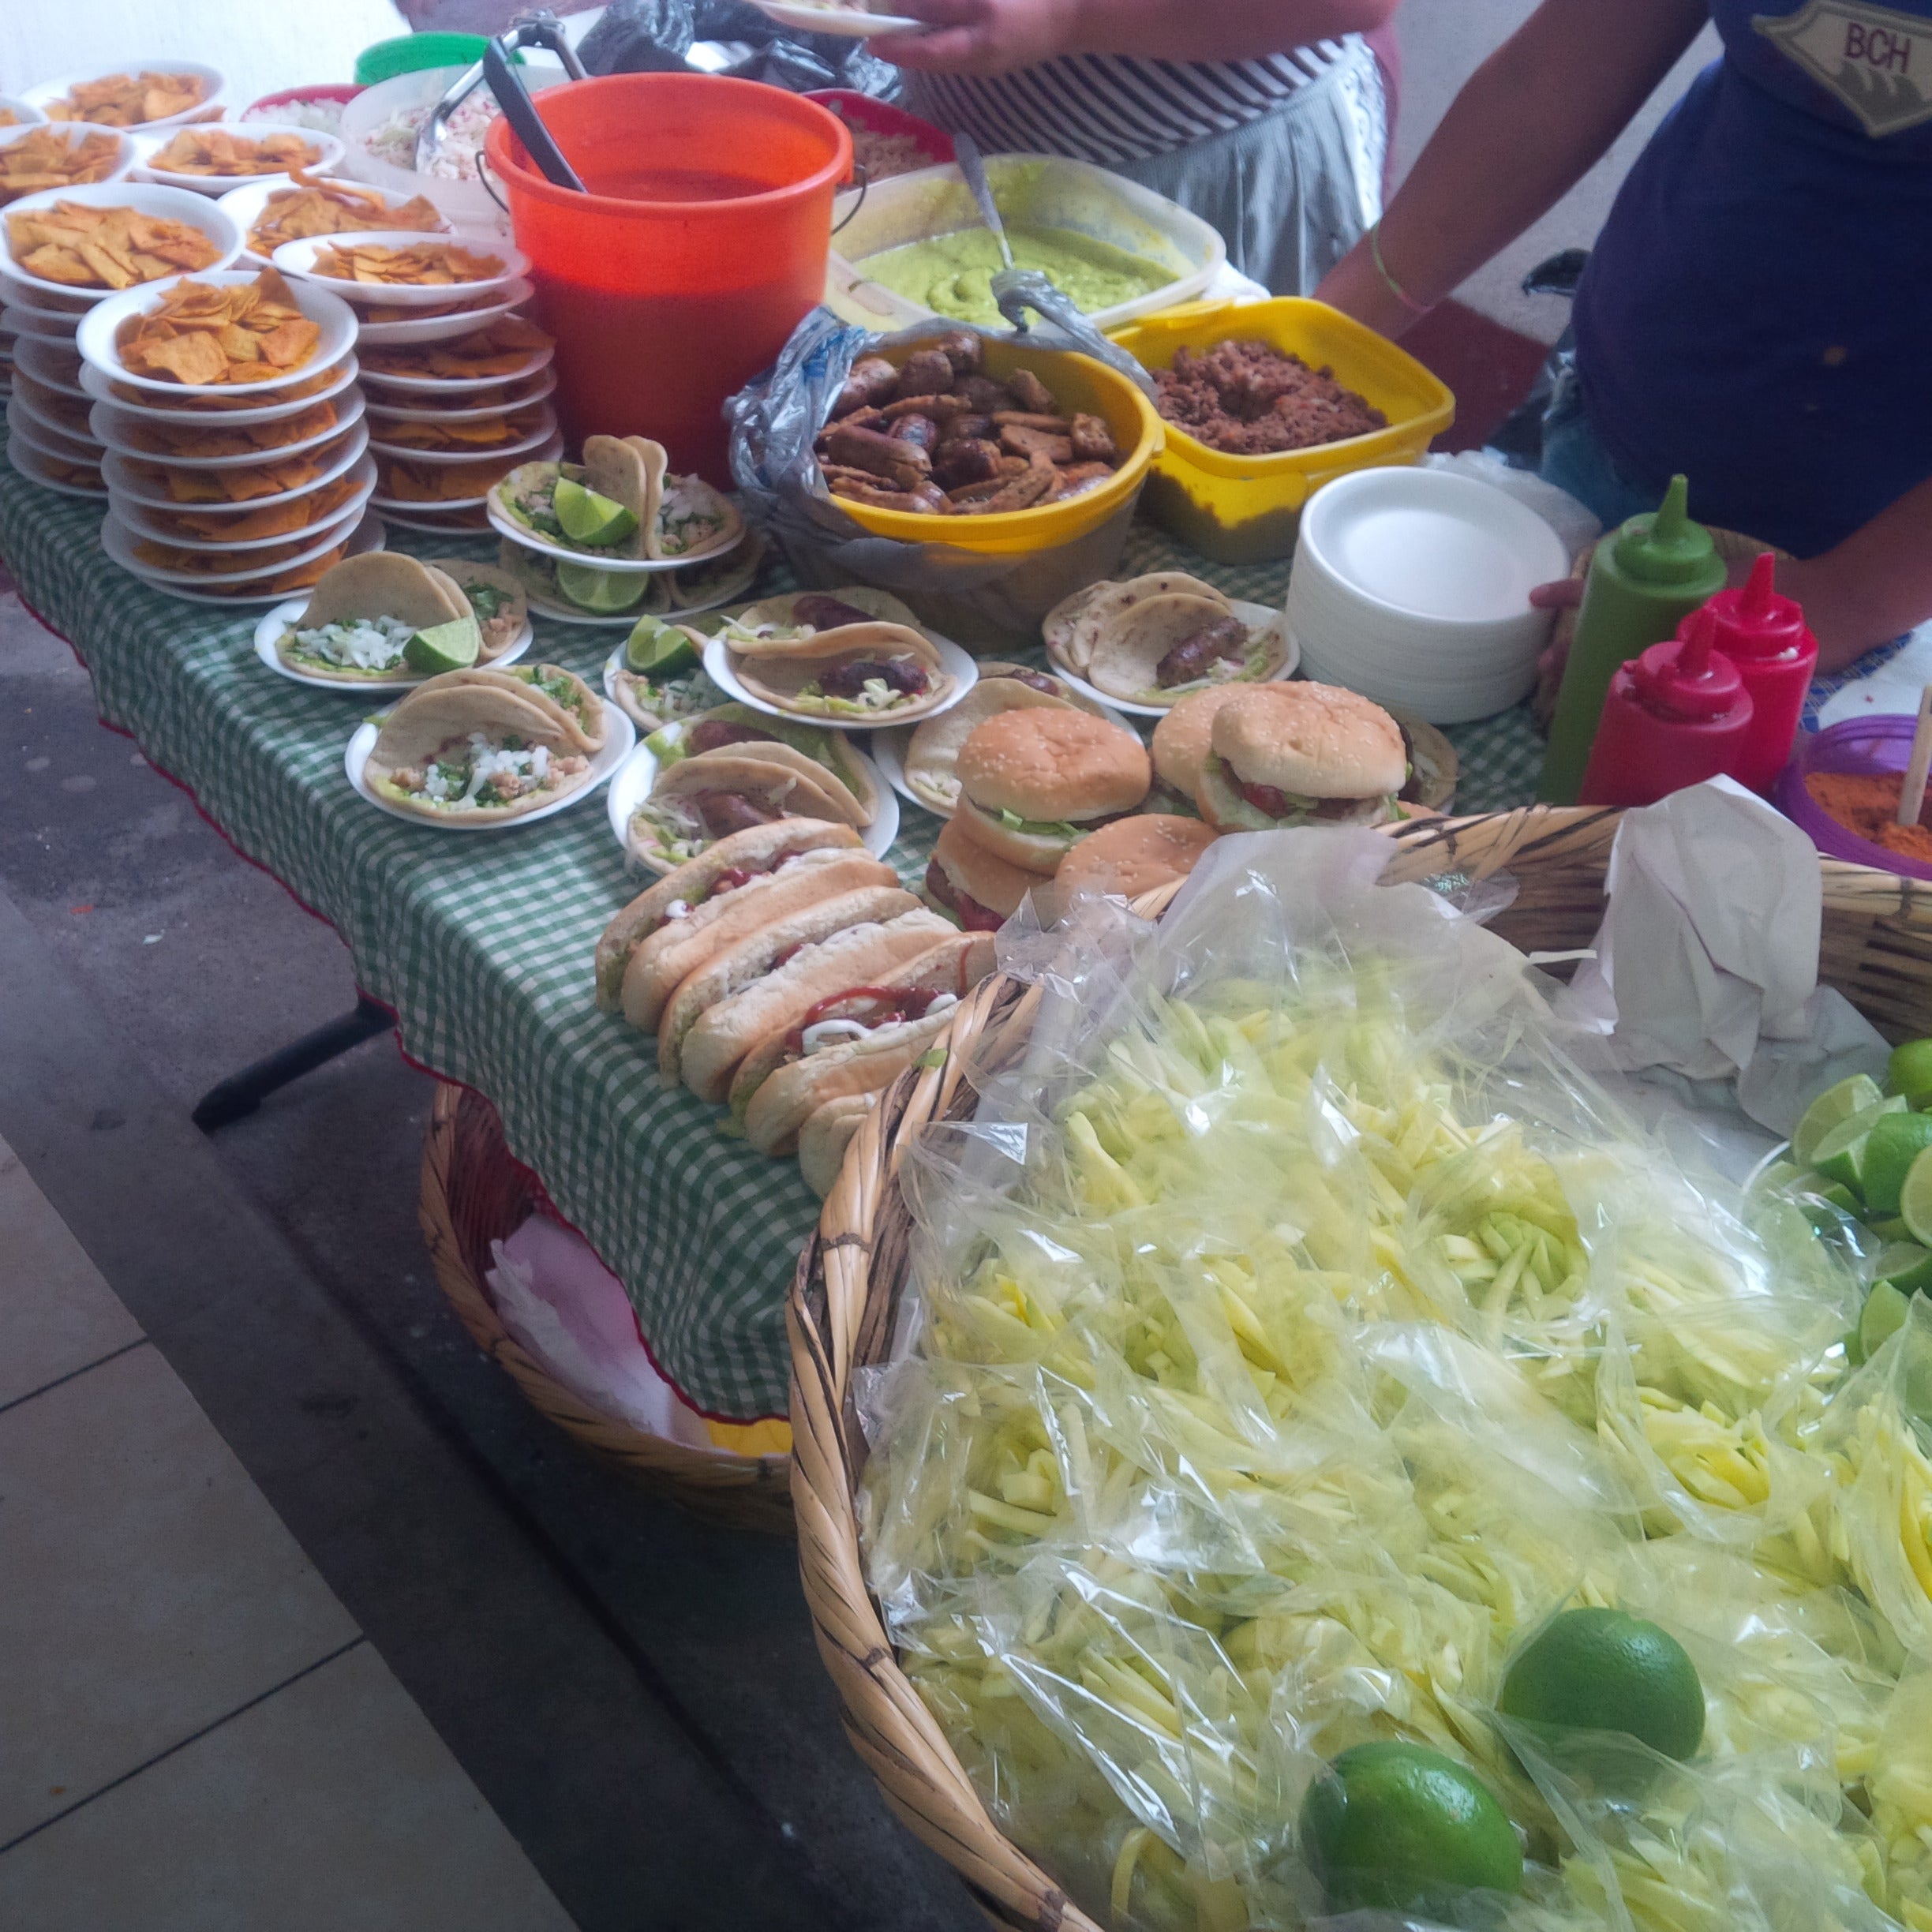 Food for sale in Guatemalan high school.